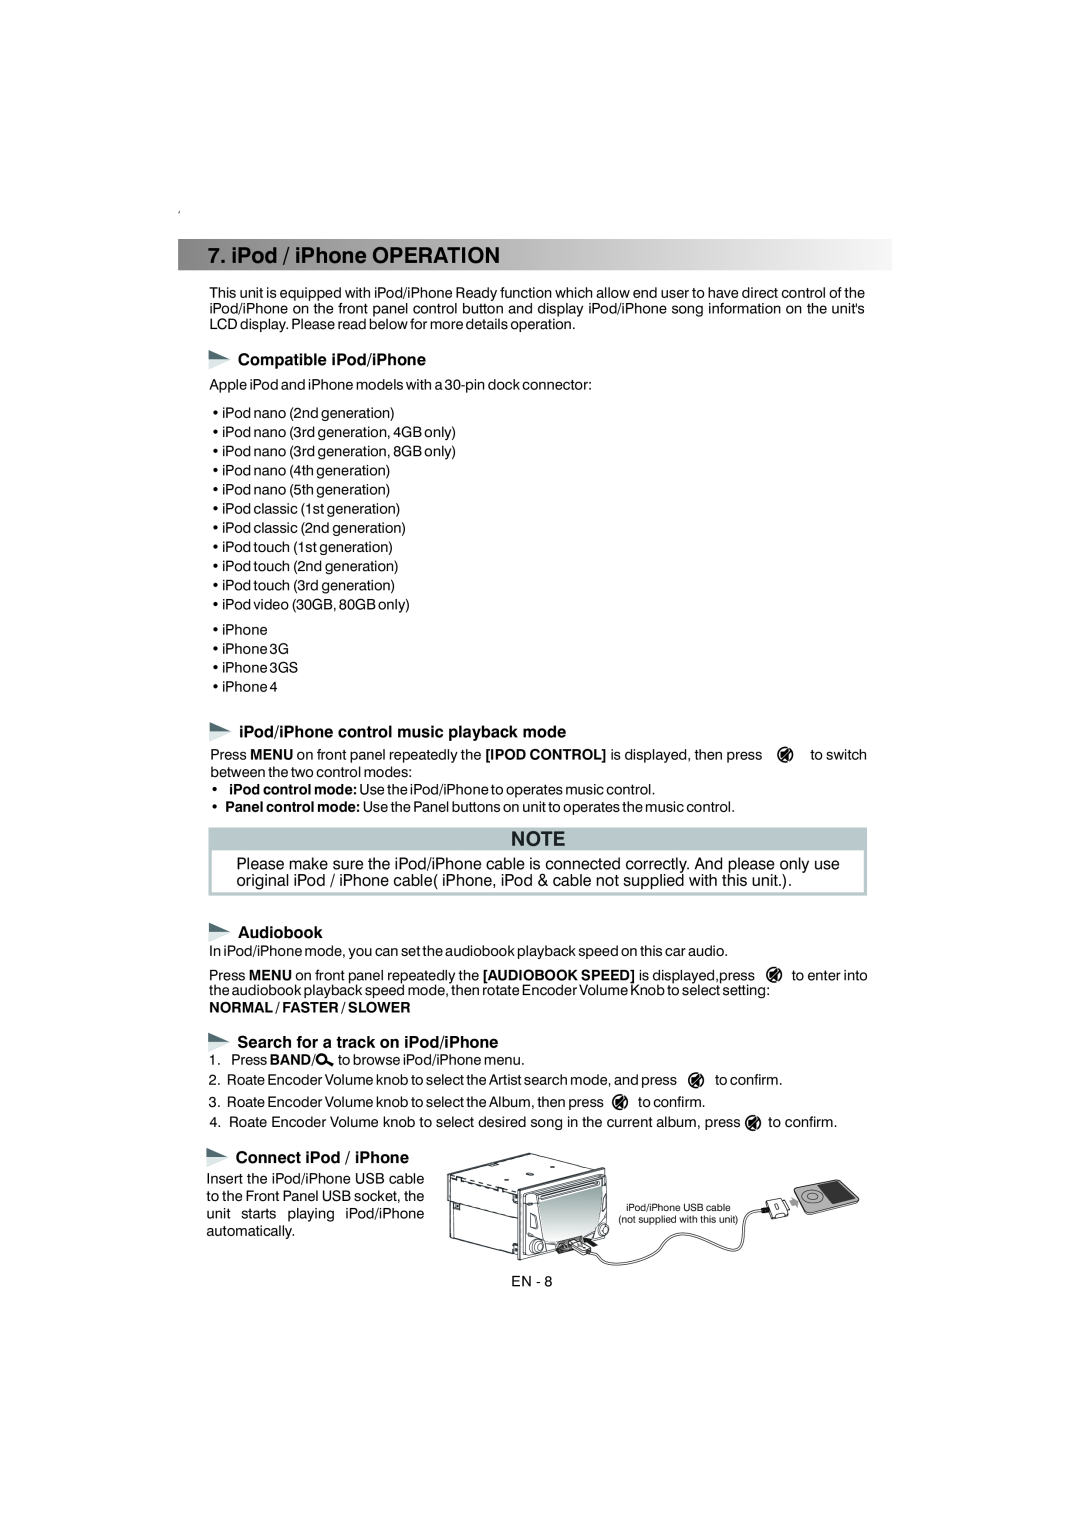 Boss Audio Systems 870DBI manual iPod / iPhone OPERATION, Compatible iPod/iPhone, iPod/iPhone control music playback mode 